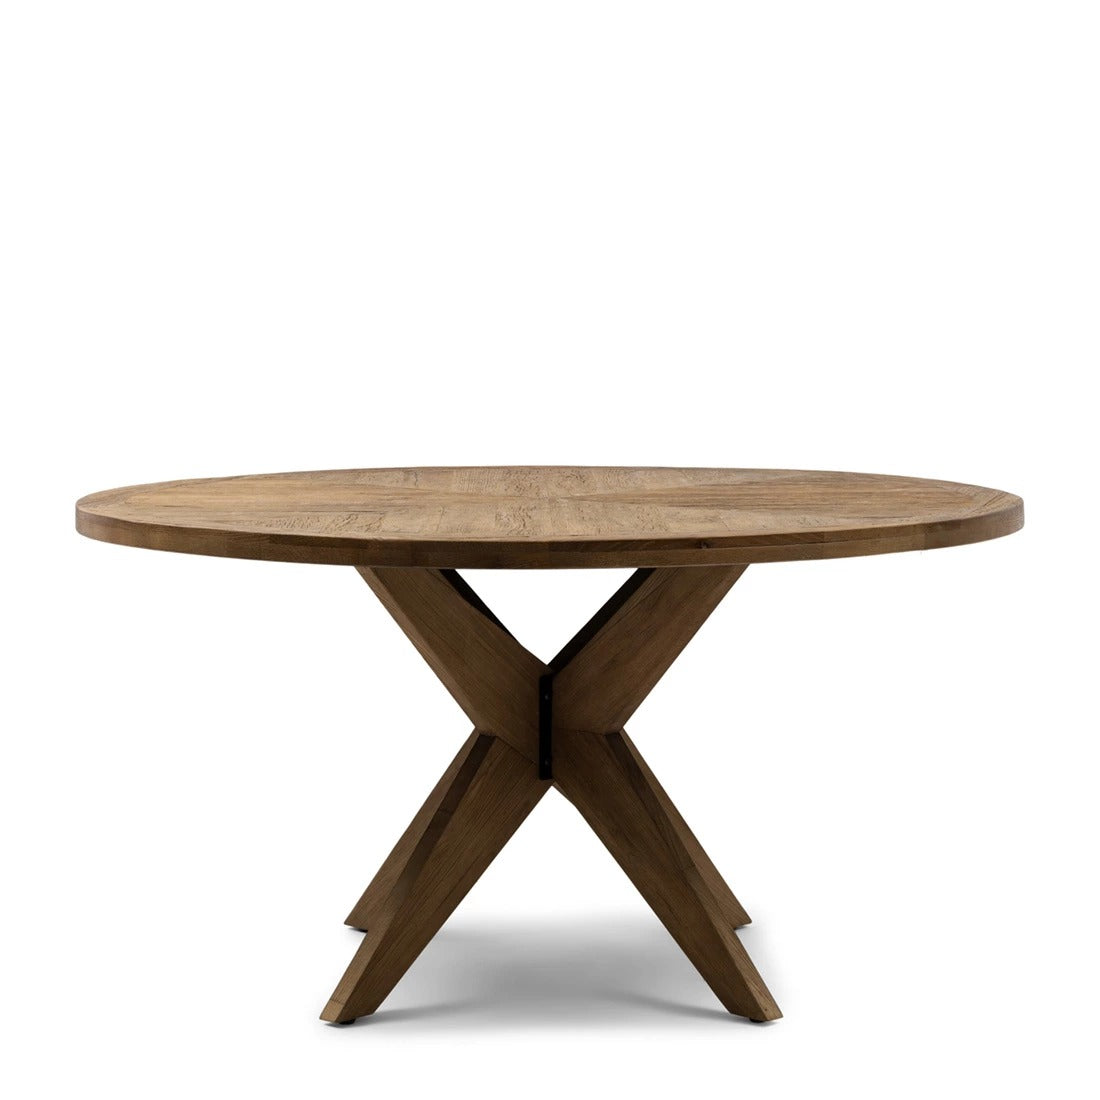 PORTLAND dining table